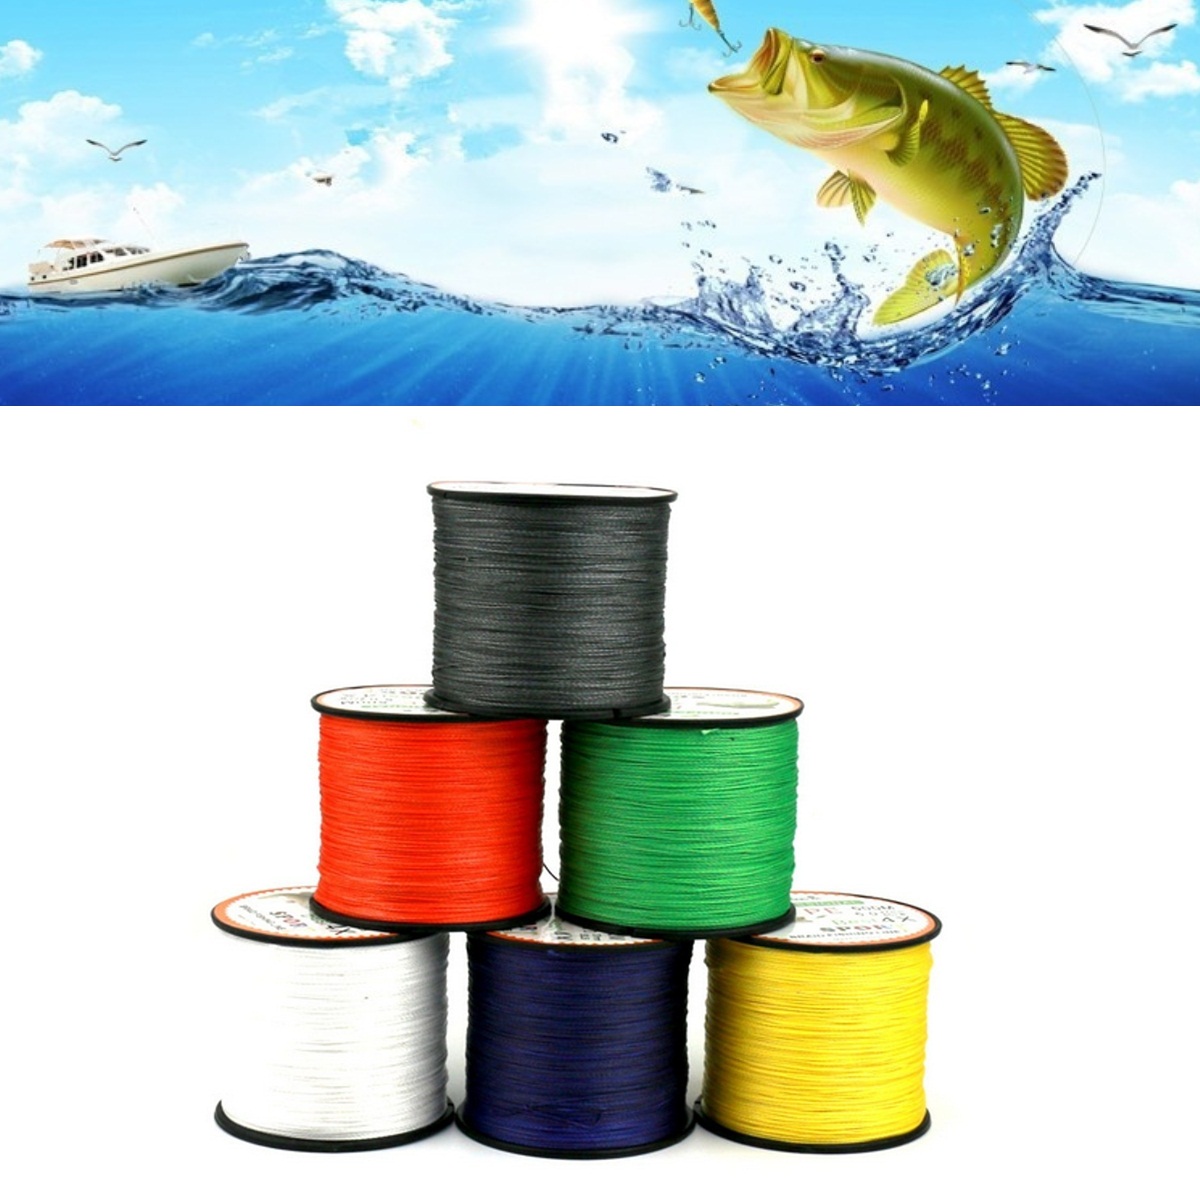 ZANLURE-500M-PE-Line-Super-Tensile-Strength-Abrasion-Resistant-Water-Absorption-Resistance-Sea-Fishi-1809910-2